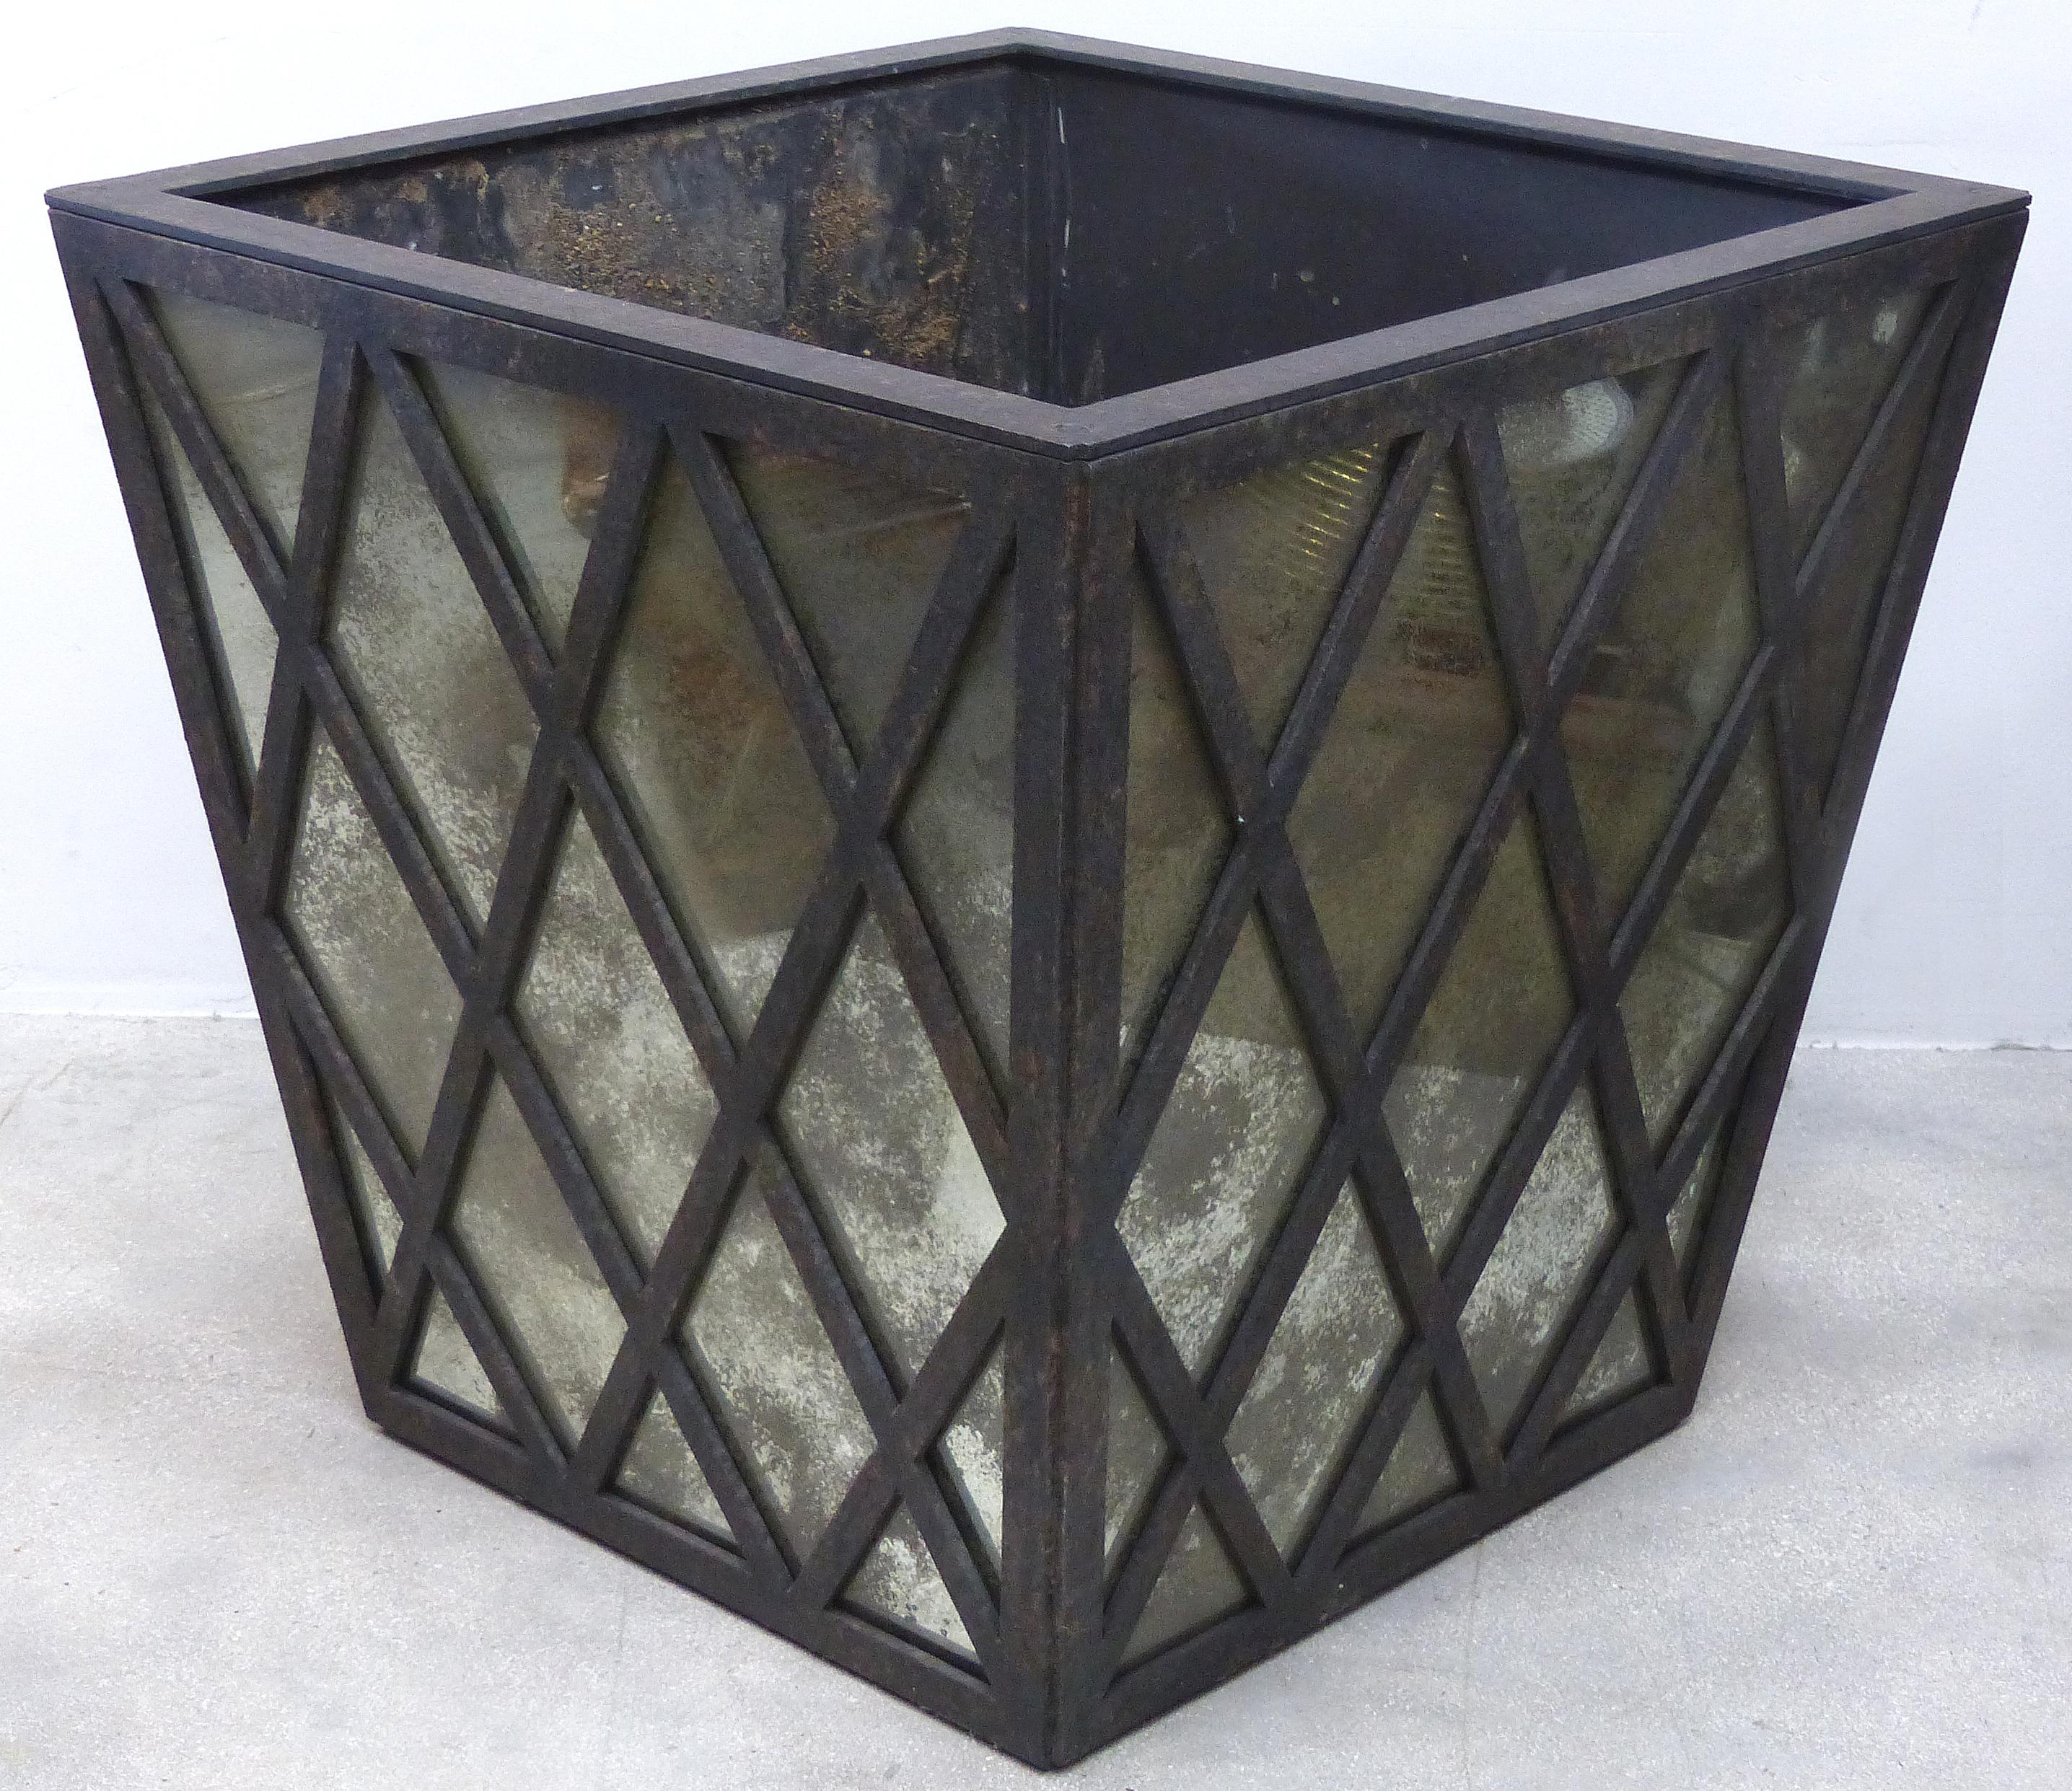 Overscale and Substantial Iron and Aged Glass Planter

Offered for sale is a large and decorative vintage planter handmade of joined iron in a lattice motif with aged mirrored sides. The interior is a metal as the mirror is on the exterior. These